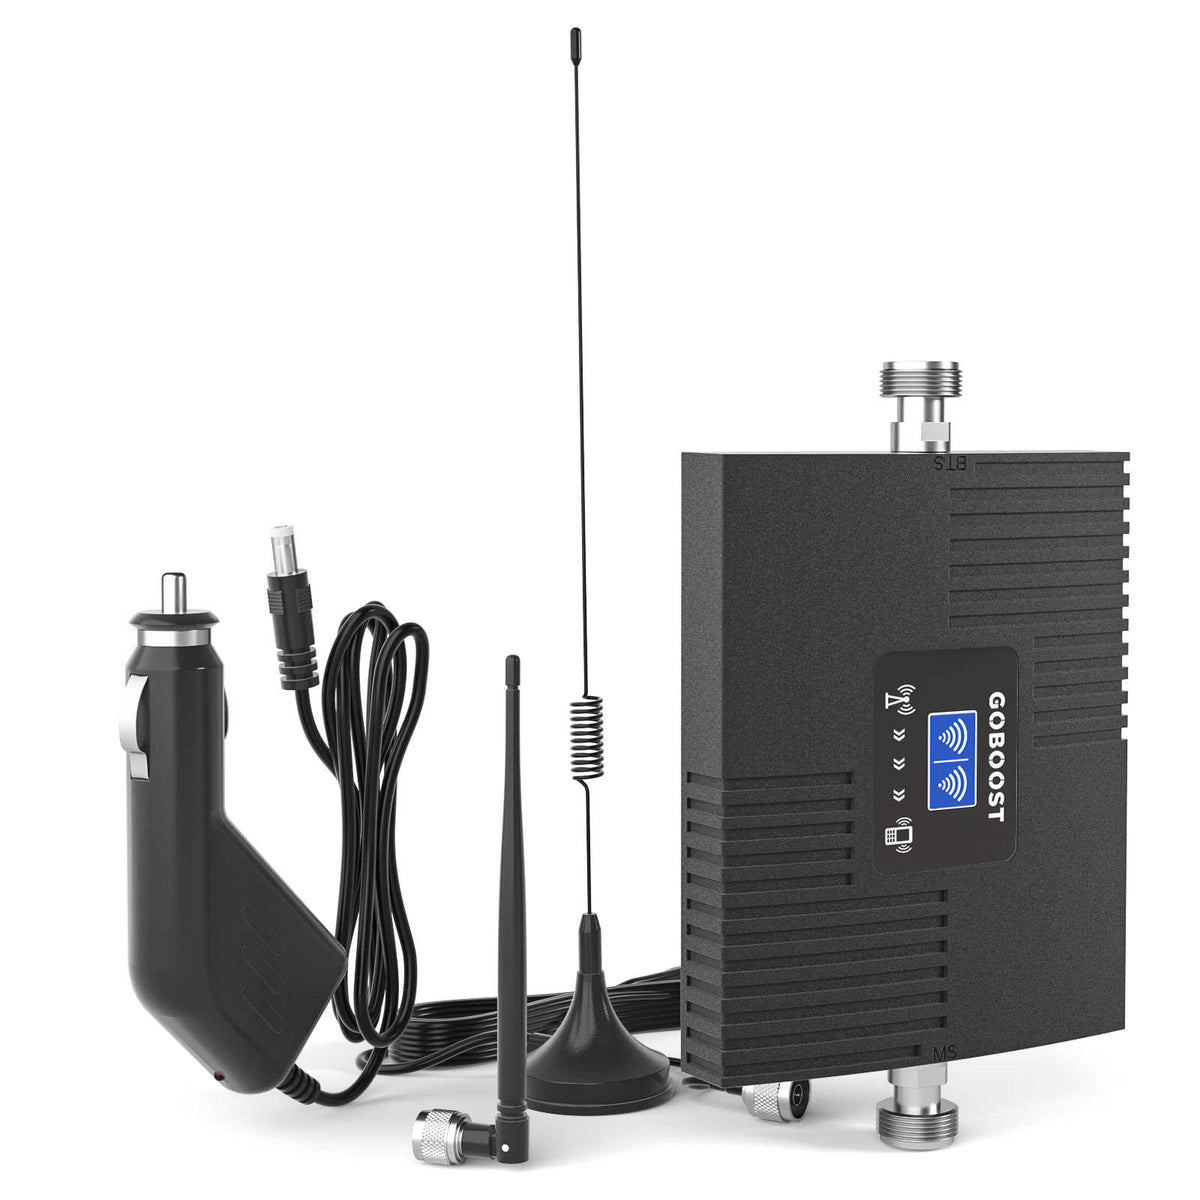 GOBOOST Cell Signal Booster for SUV/Trucks/Vans- High Gain Hot